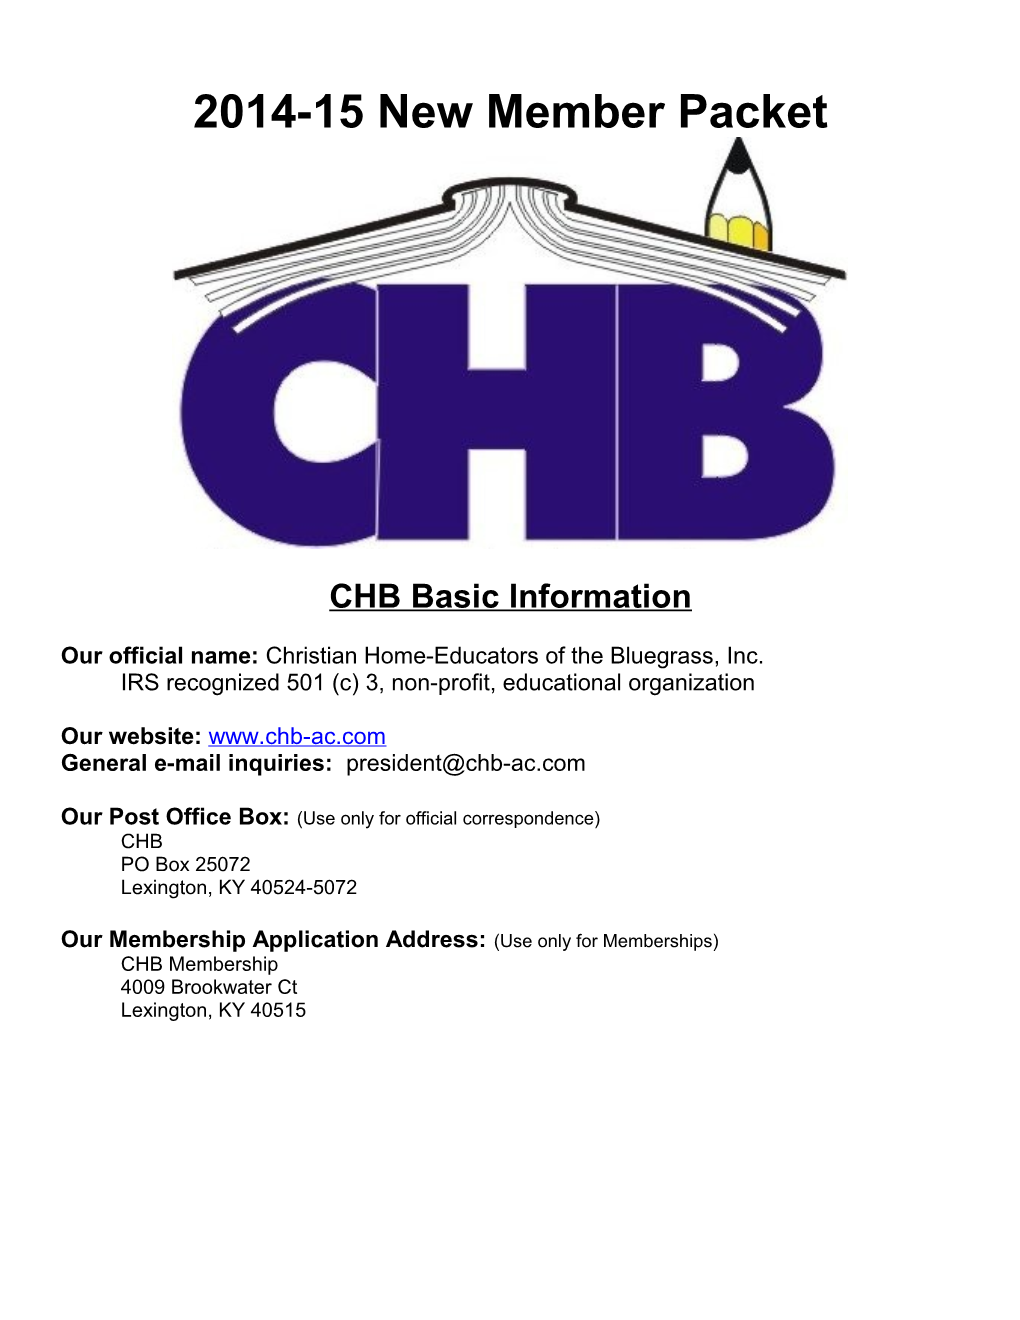 CHB Note to Members